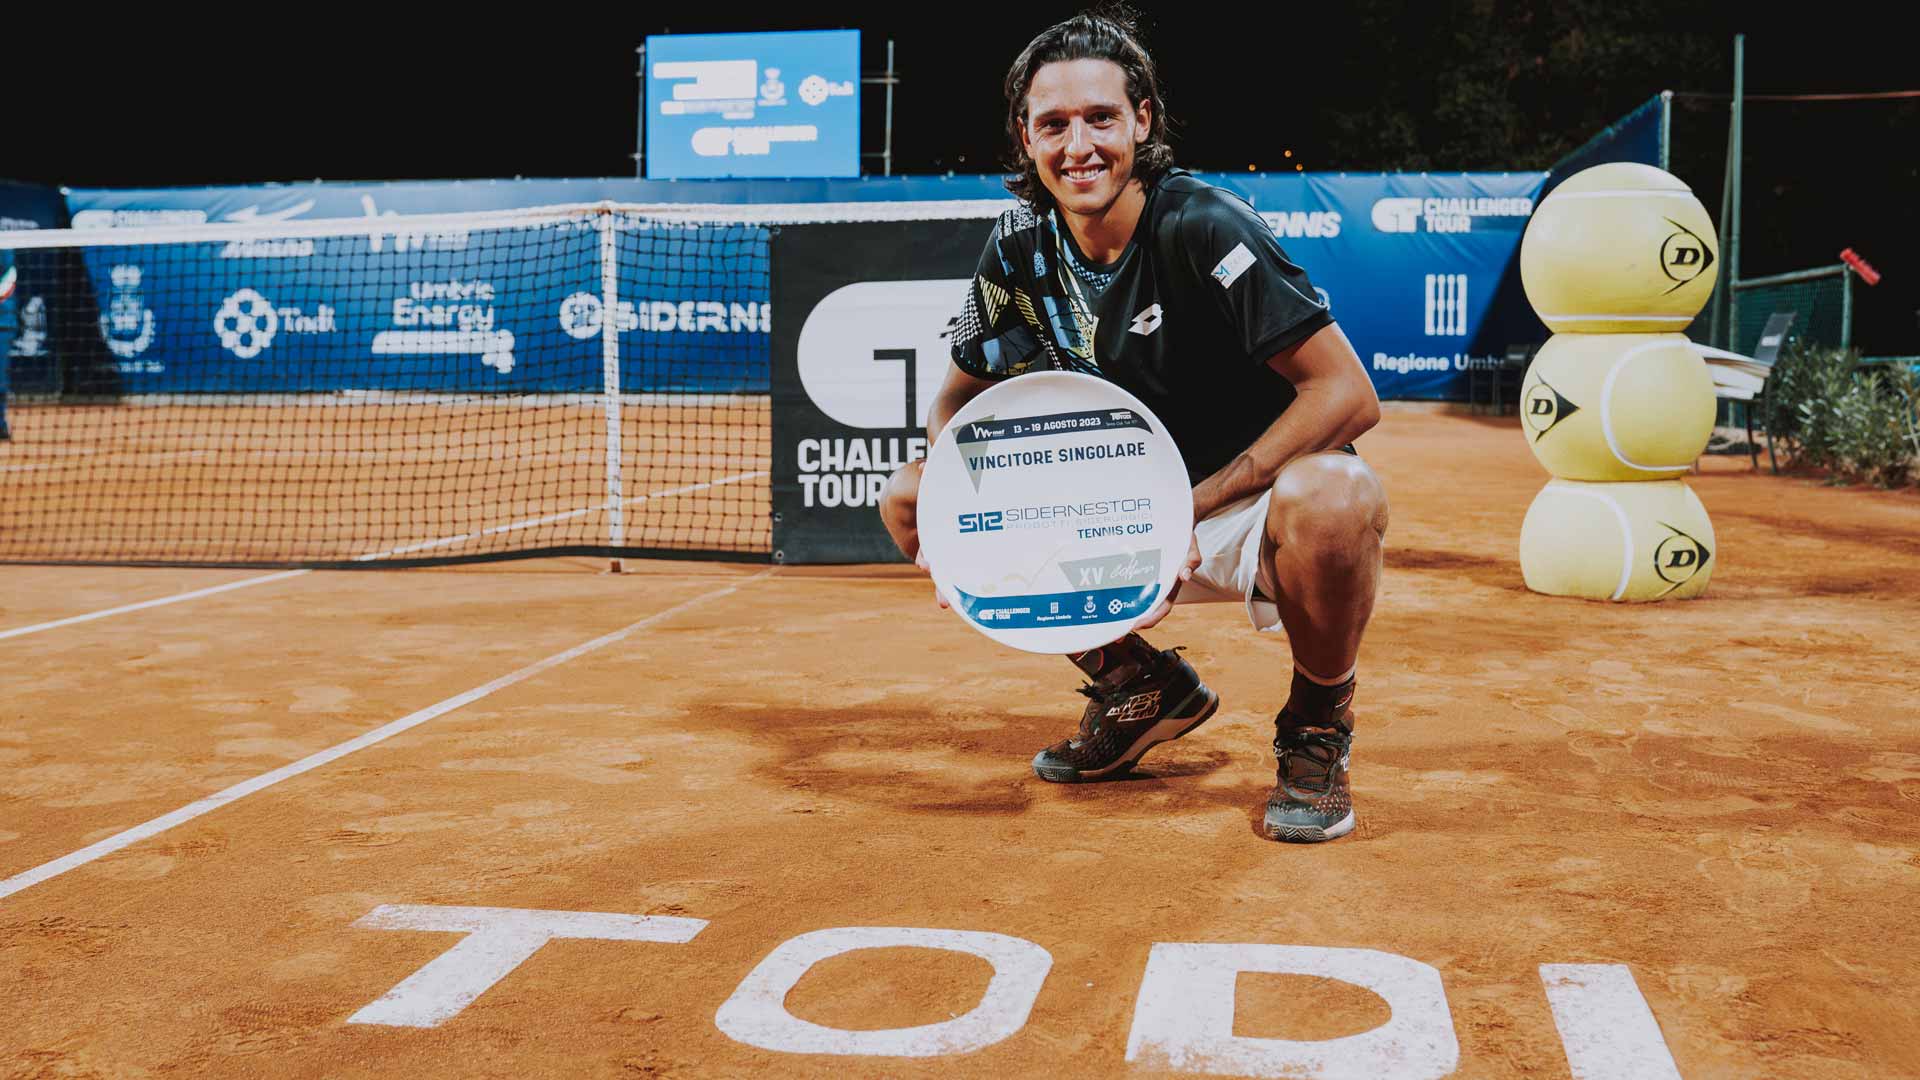 <a href='https://www.atptour.com/en/players/luciano-darderi/d0fj/overview'>Luciano Darderi</a> wins his first Challenger title in Todi, Italy.